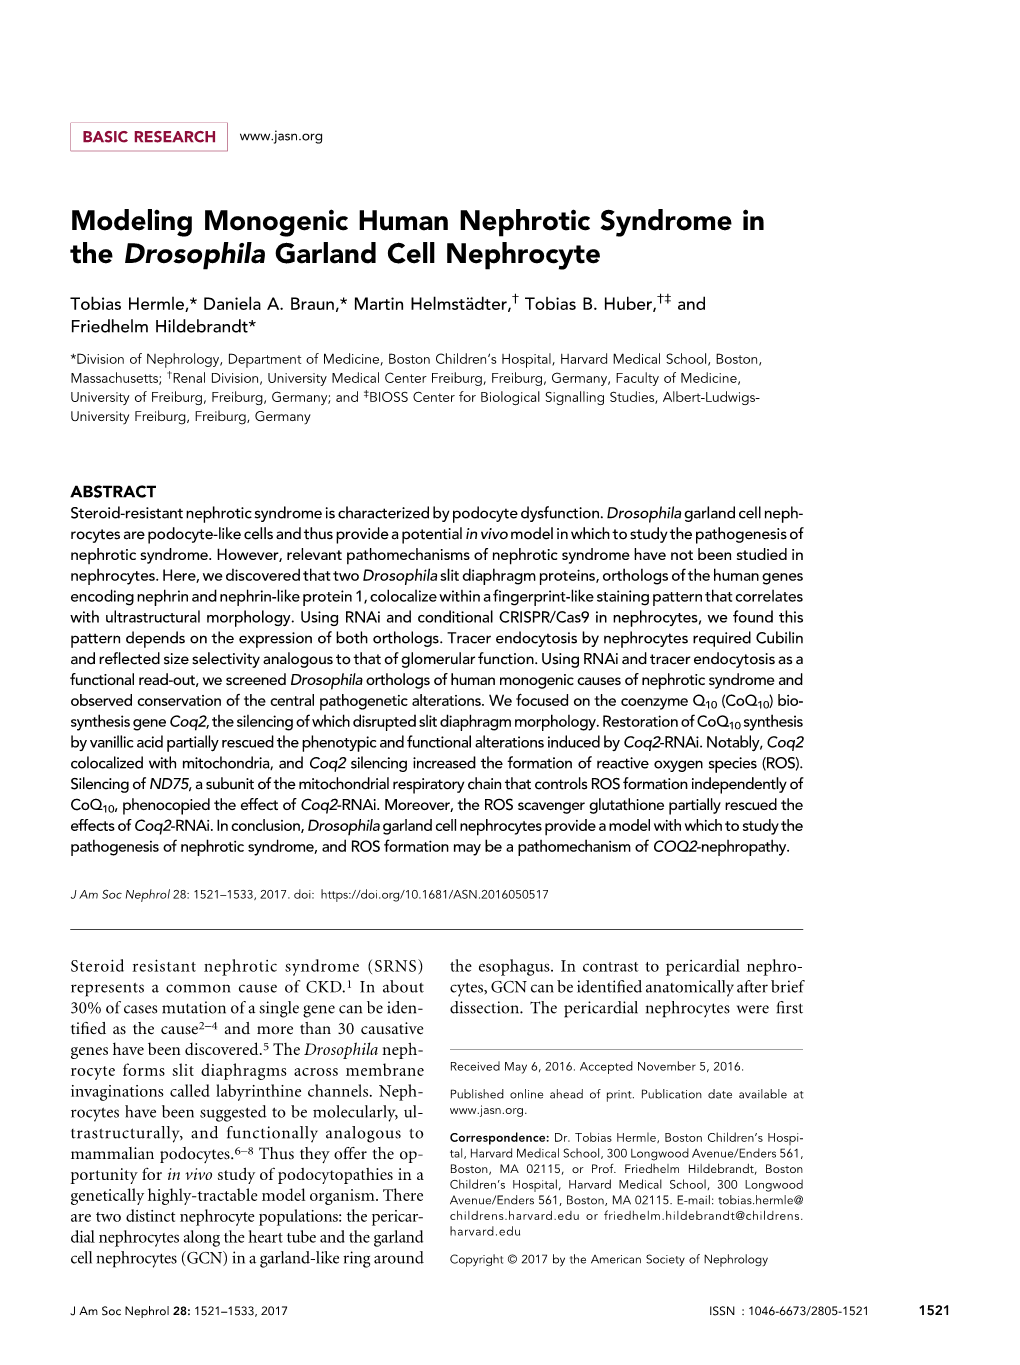 Modeling Monogenic Human Nephrotic Syndrome in the Drosophila Garland Cell Nephrocyte